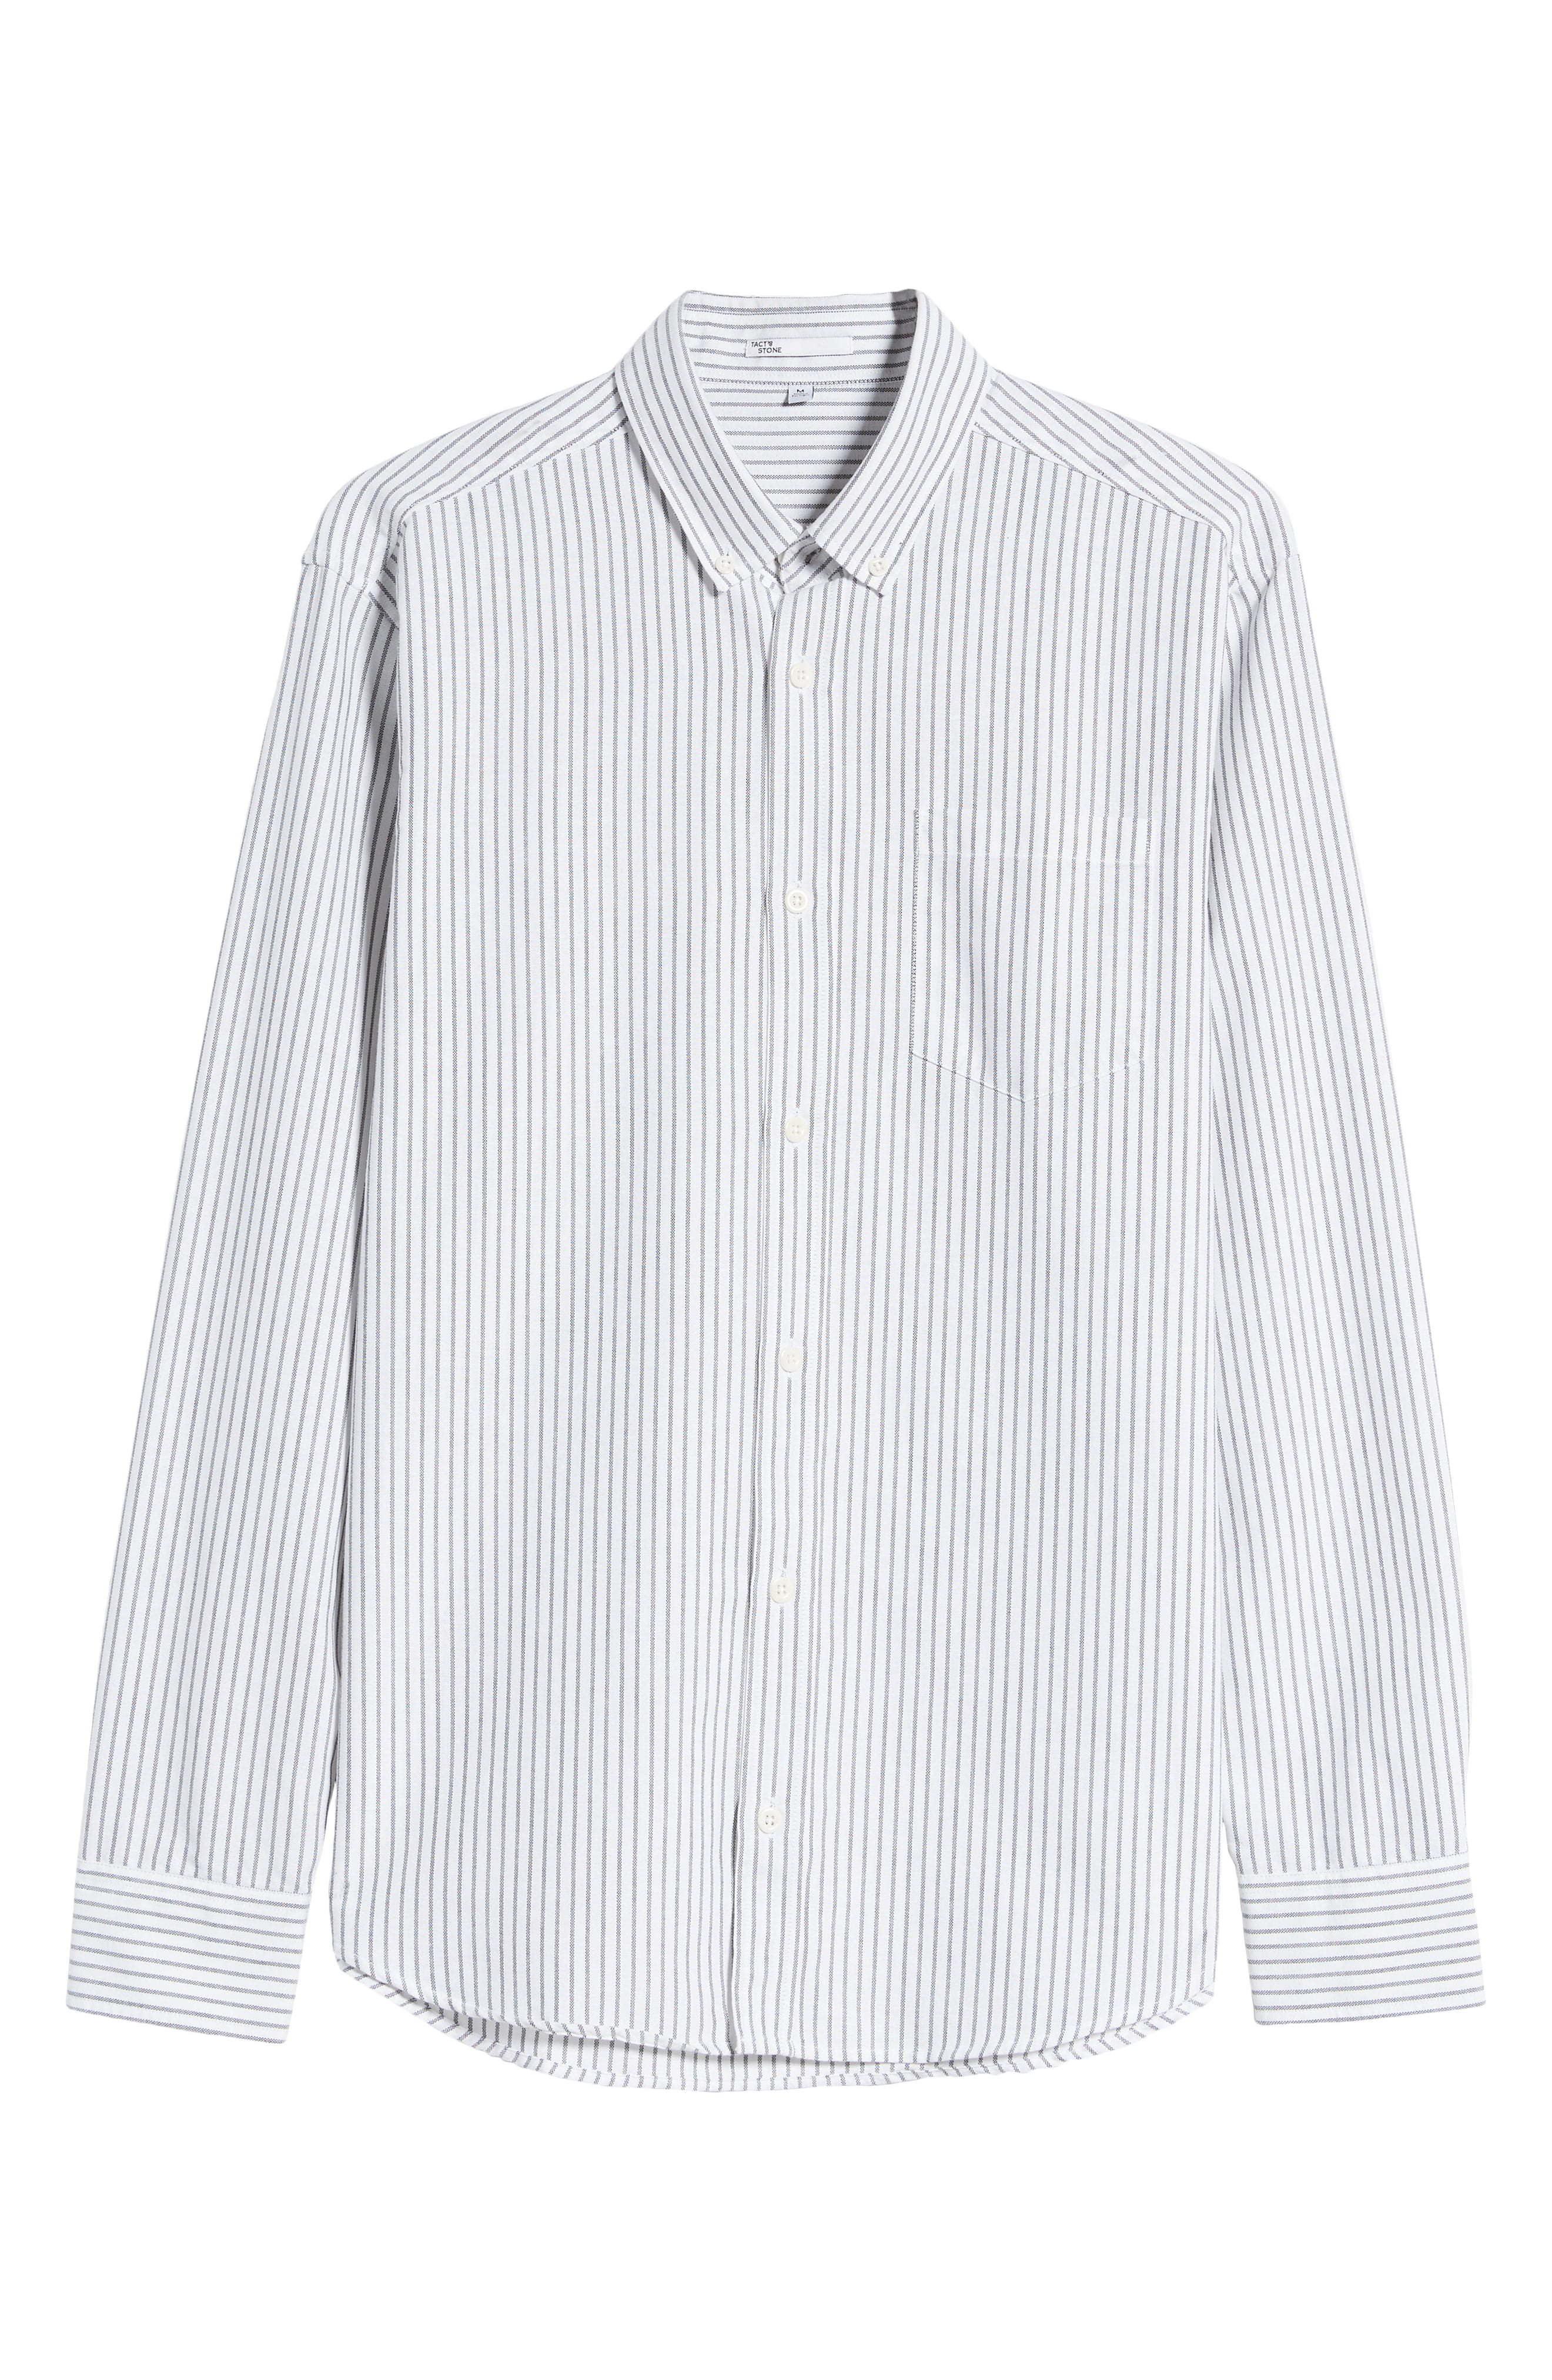 Tact & Stone The Upcycled Oxford Shirt, $125 | Nordstrom | Lookastic